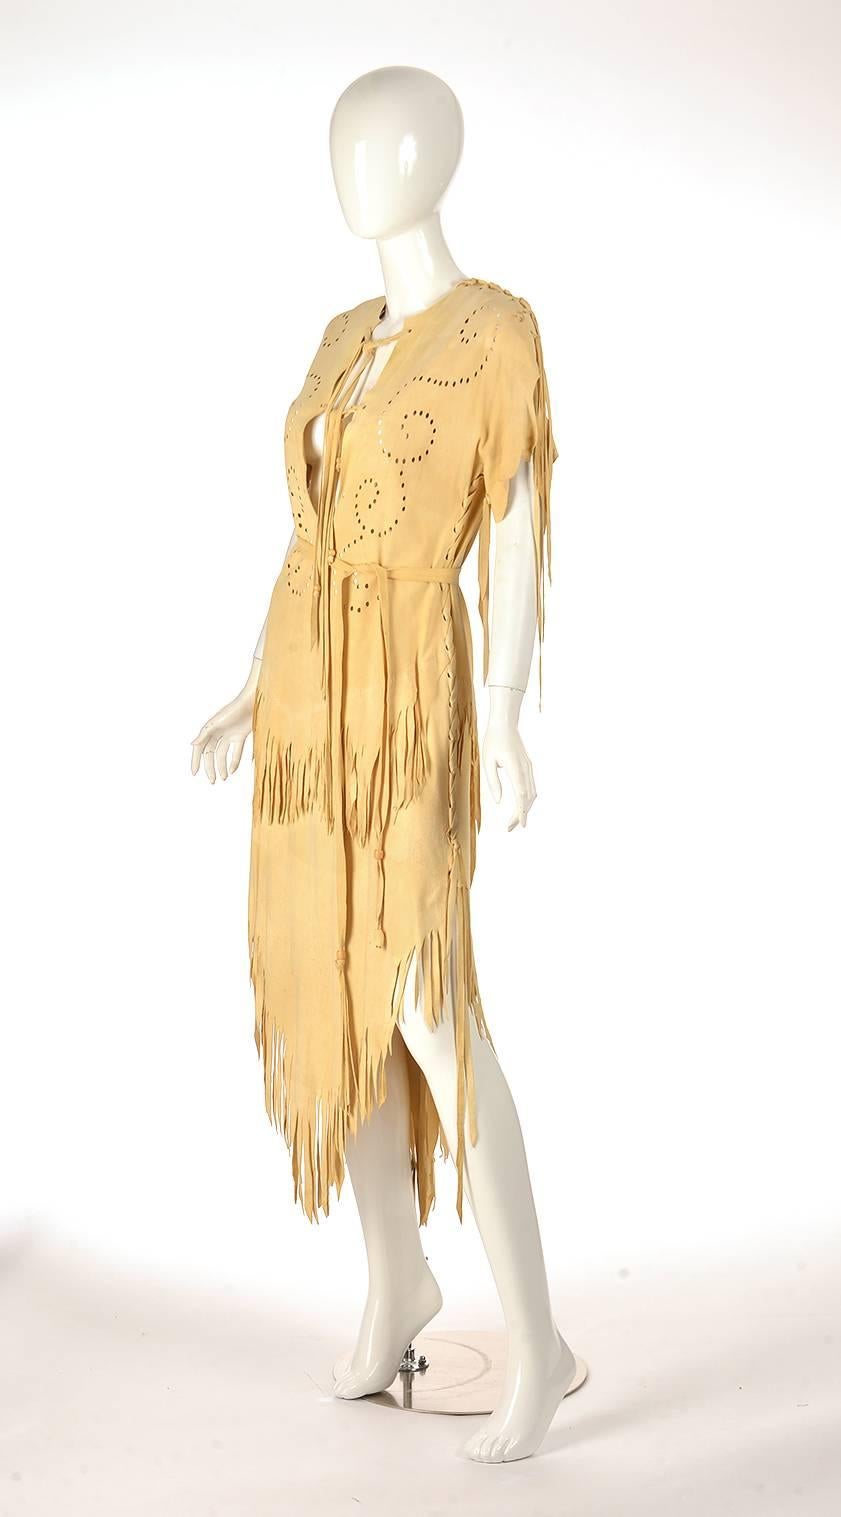 
Native American leather dress with double layer fringed bottom. Dye cut swirl design on top half of dress. Dress features straps of leather, finished with beading. Sleeves are threaded together with leather. Dress slips overhead. Can be worn, used